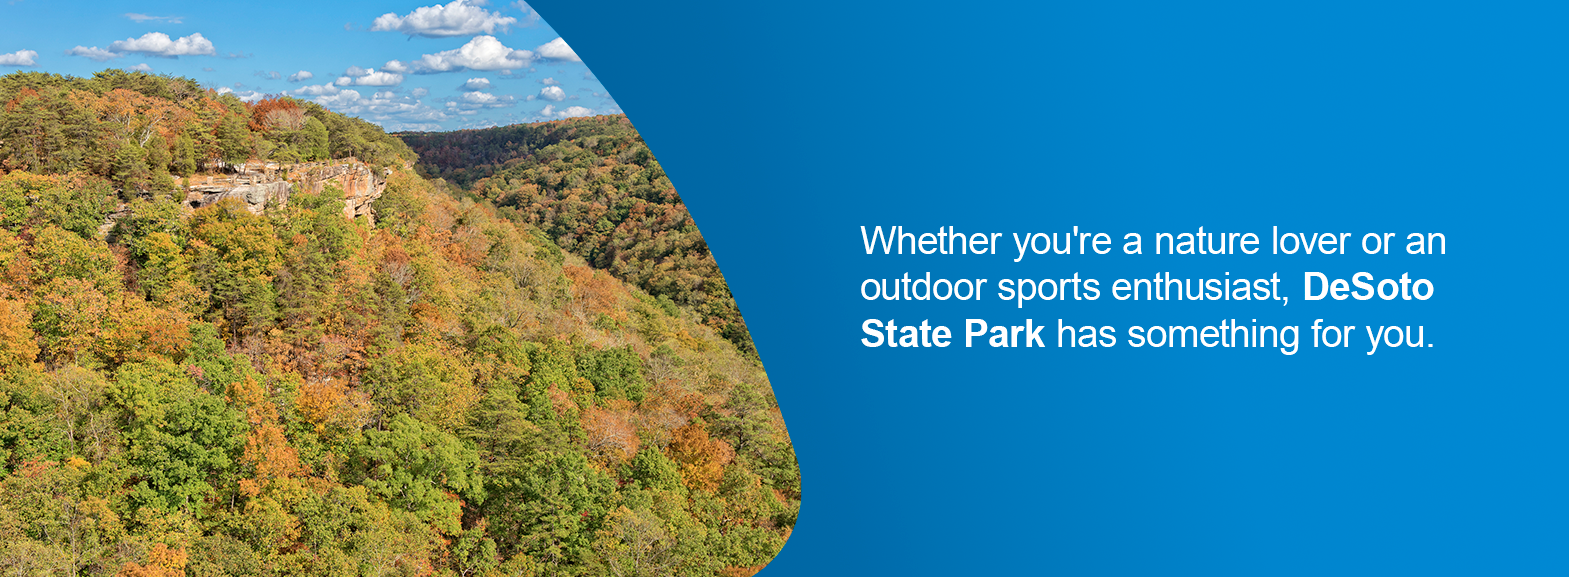 Whether you're a nature lover or an outdoor sports enthusiast, DeSoto State Park has something for you. 